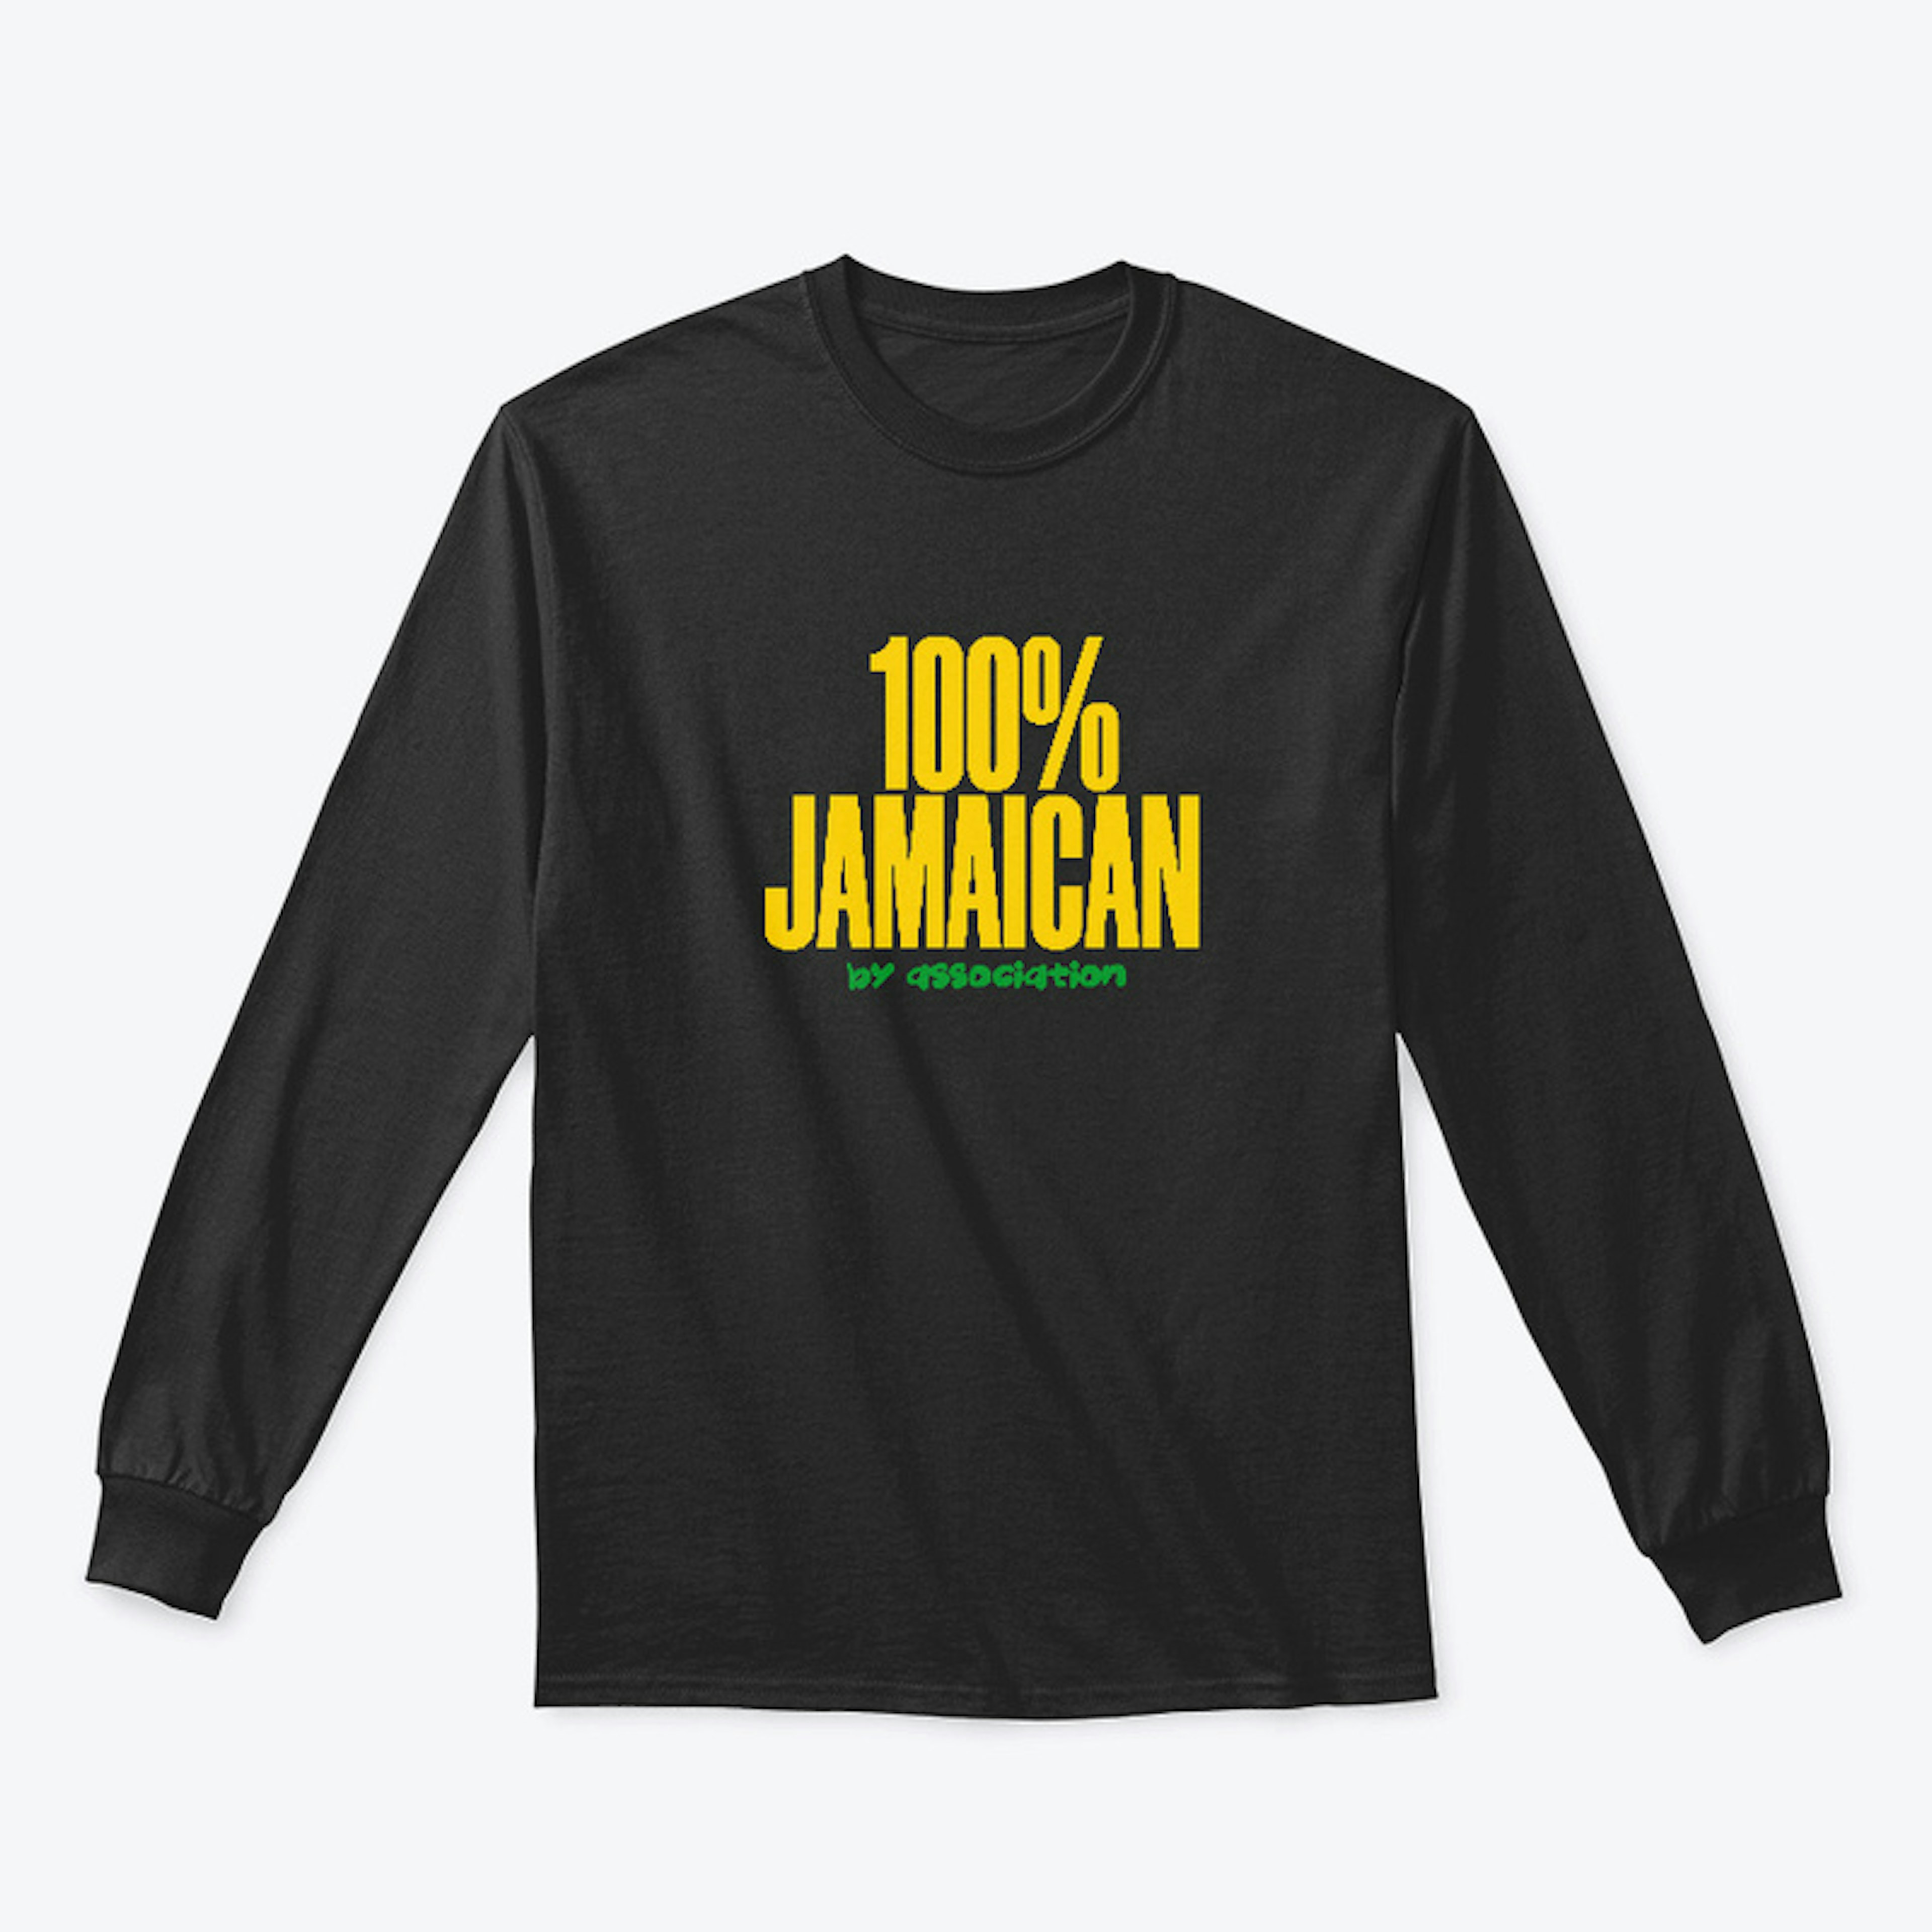 100% Jamaican By Association